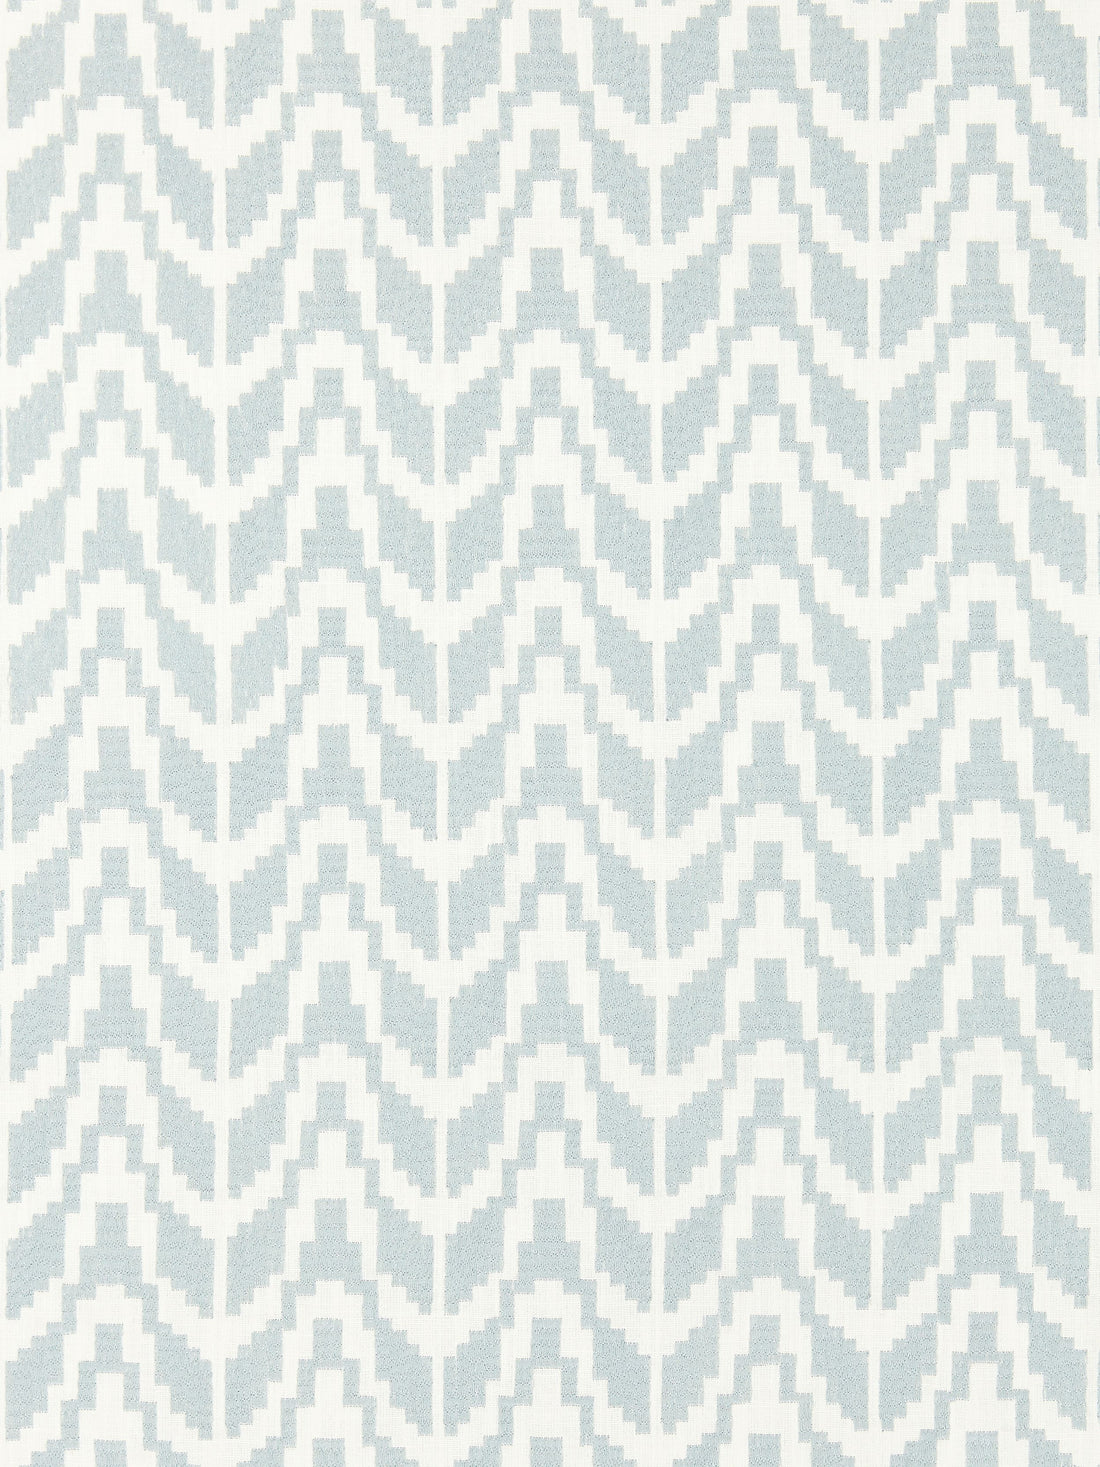 Chevron Embroidery fabric in rain color - pattern number SC 000227103 - by Scalamandre in the Scalamandre Fabrics Book 1 collection